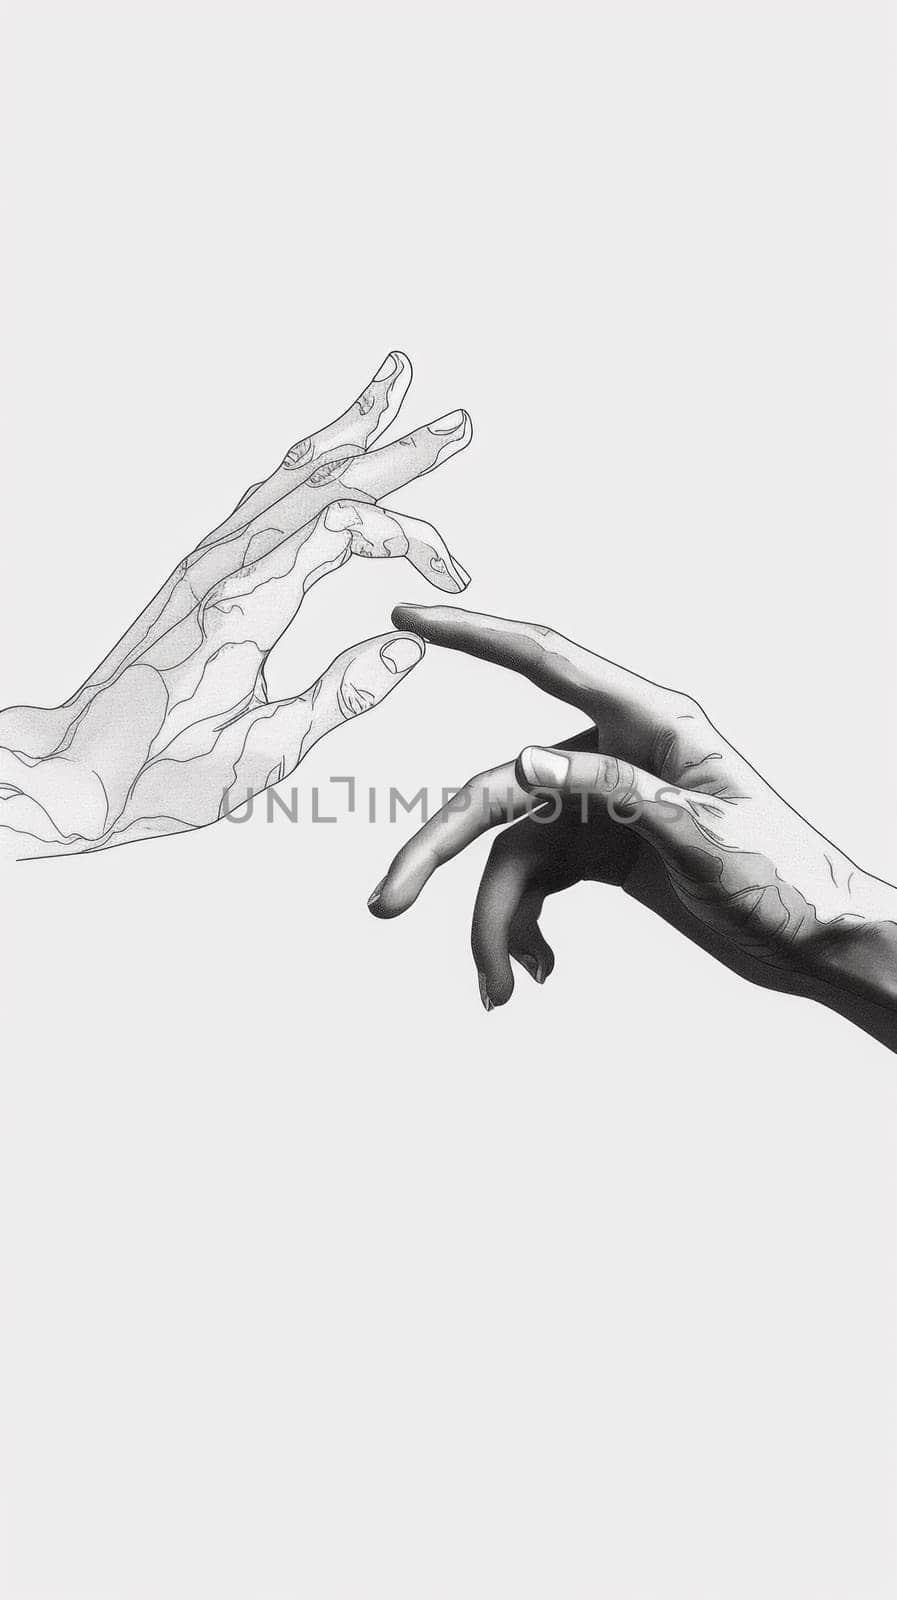 A drawing of two hands reaching for each other, AI by starush